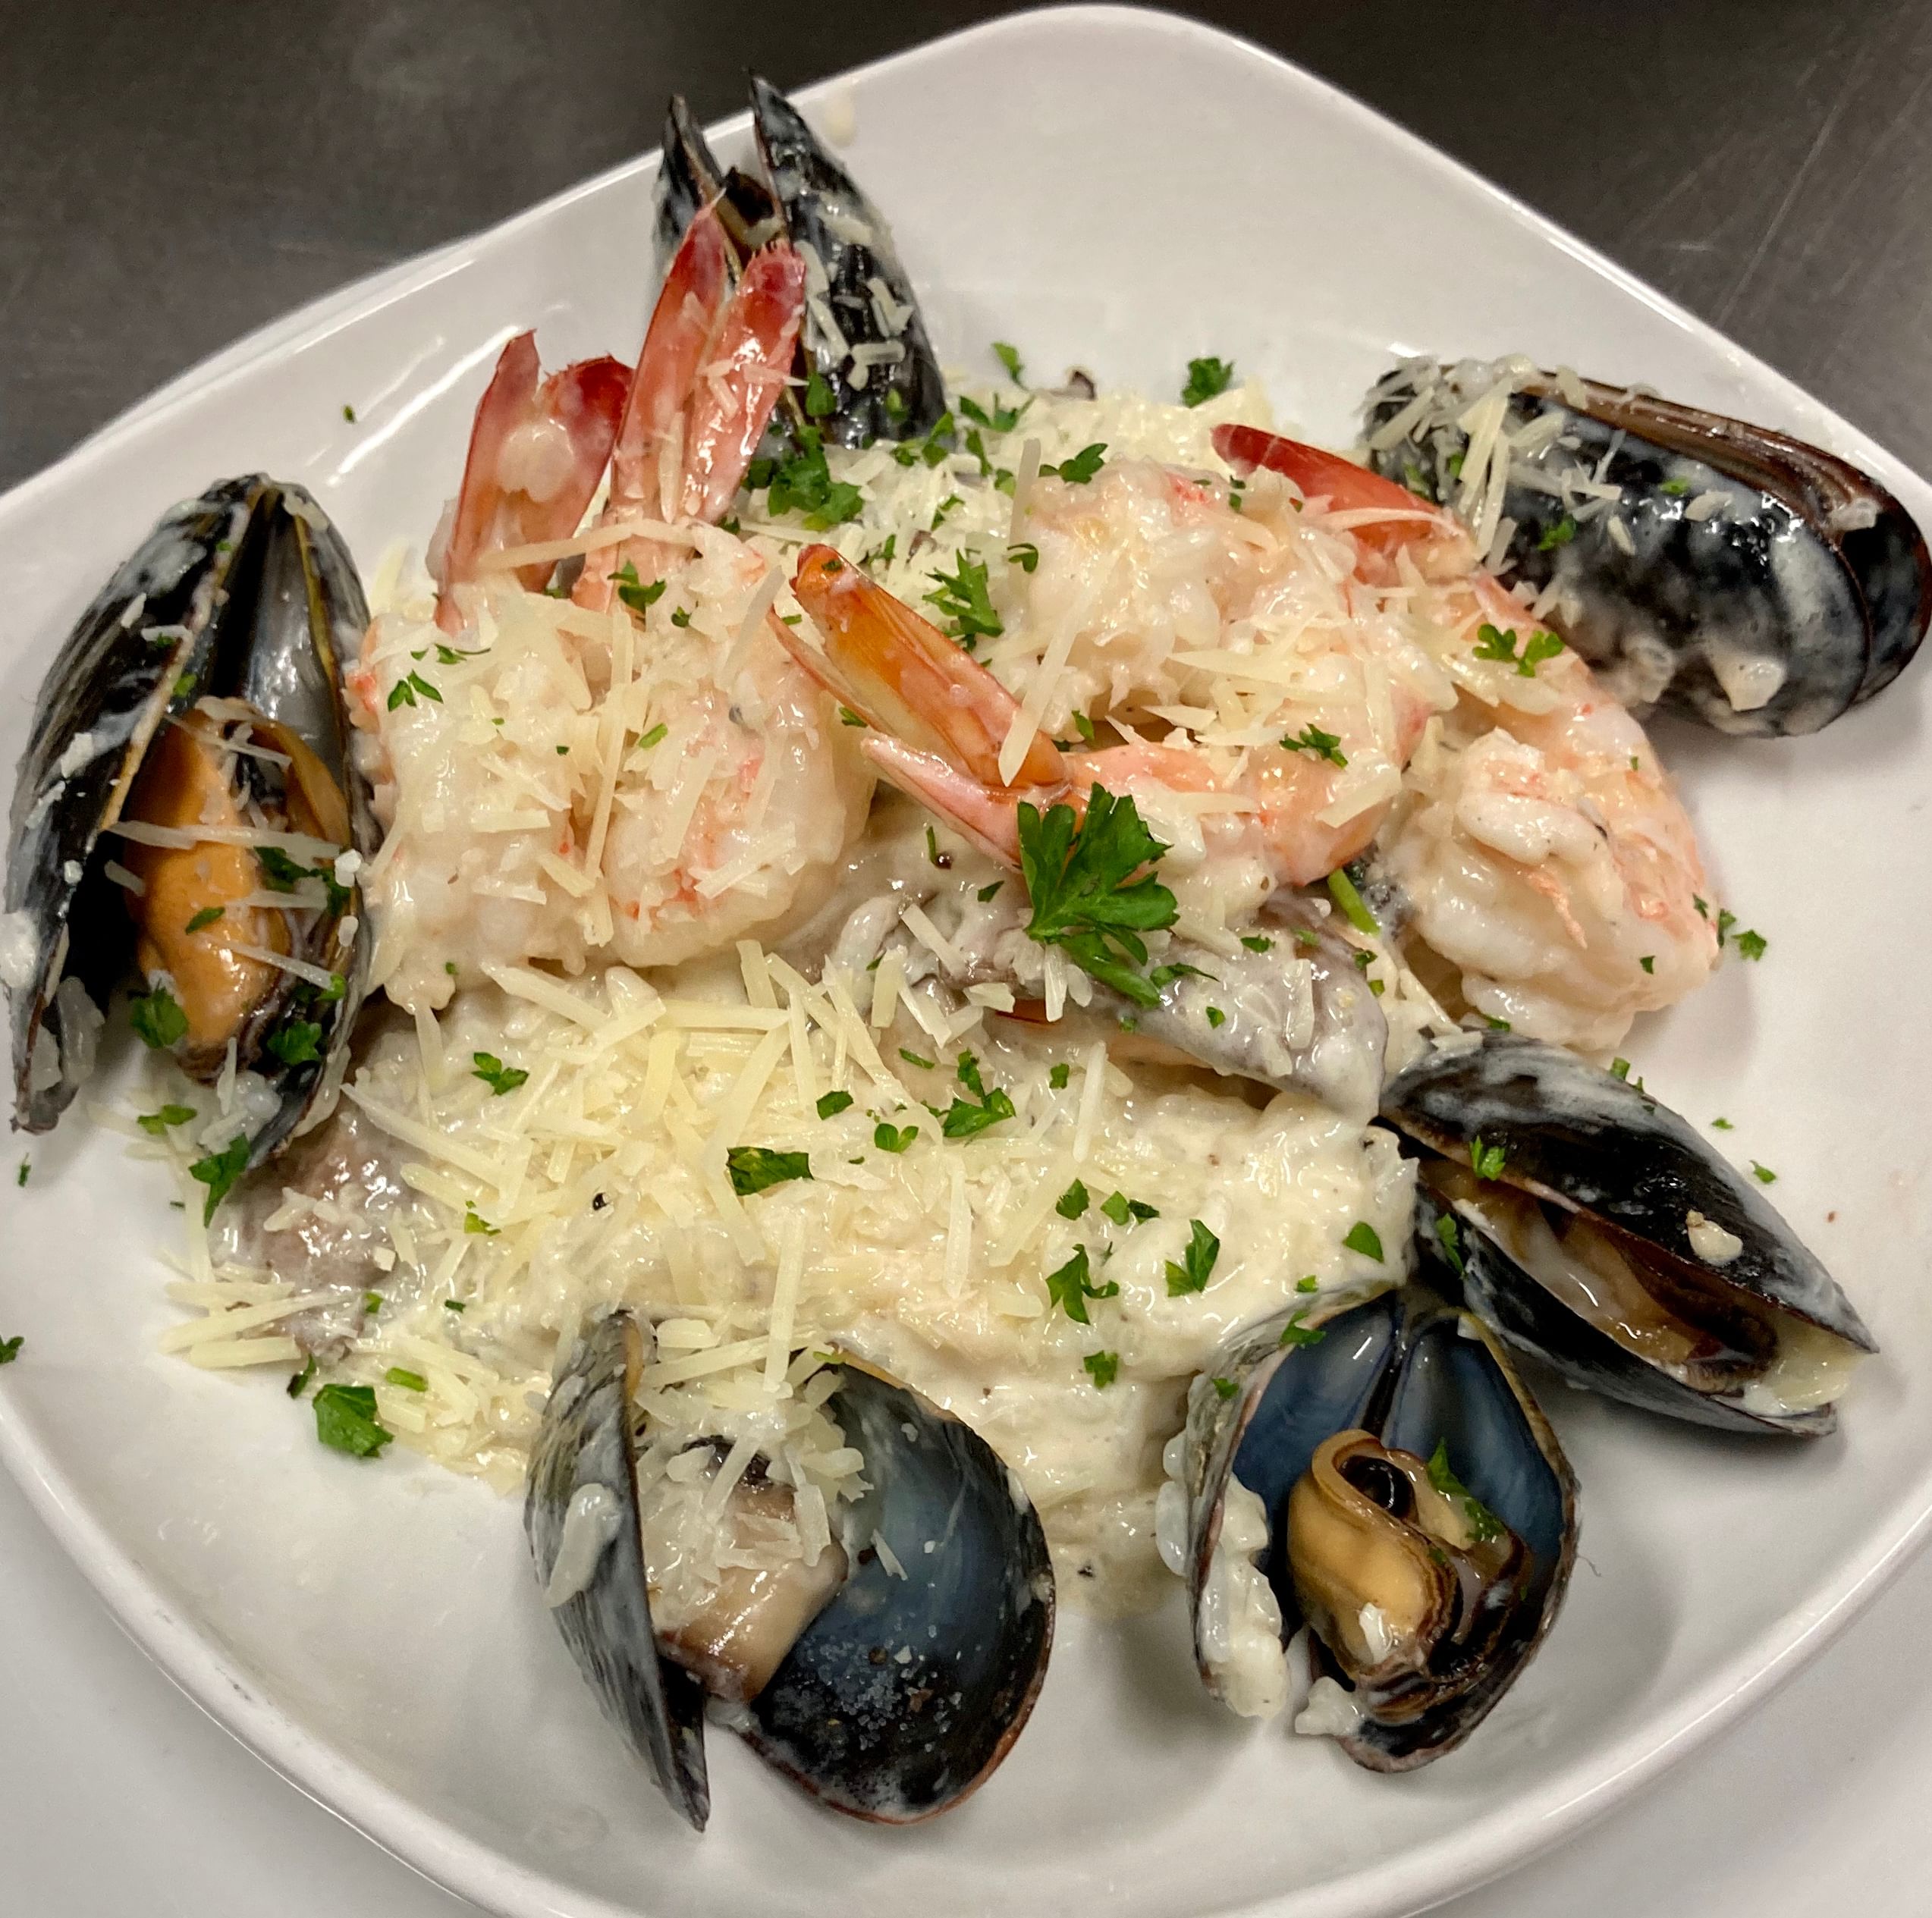 Seafood Rissotto